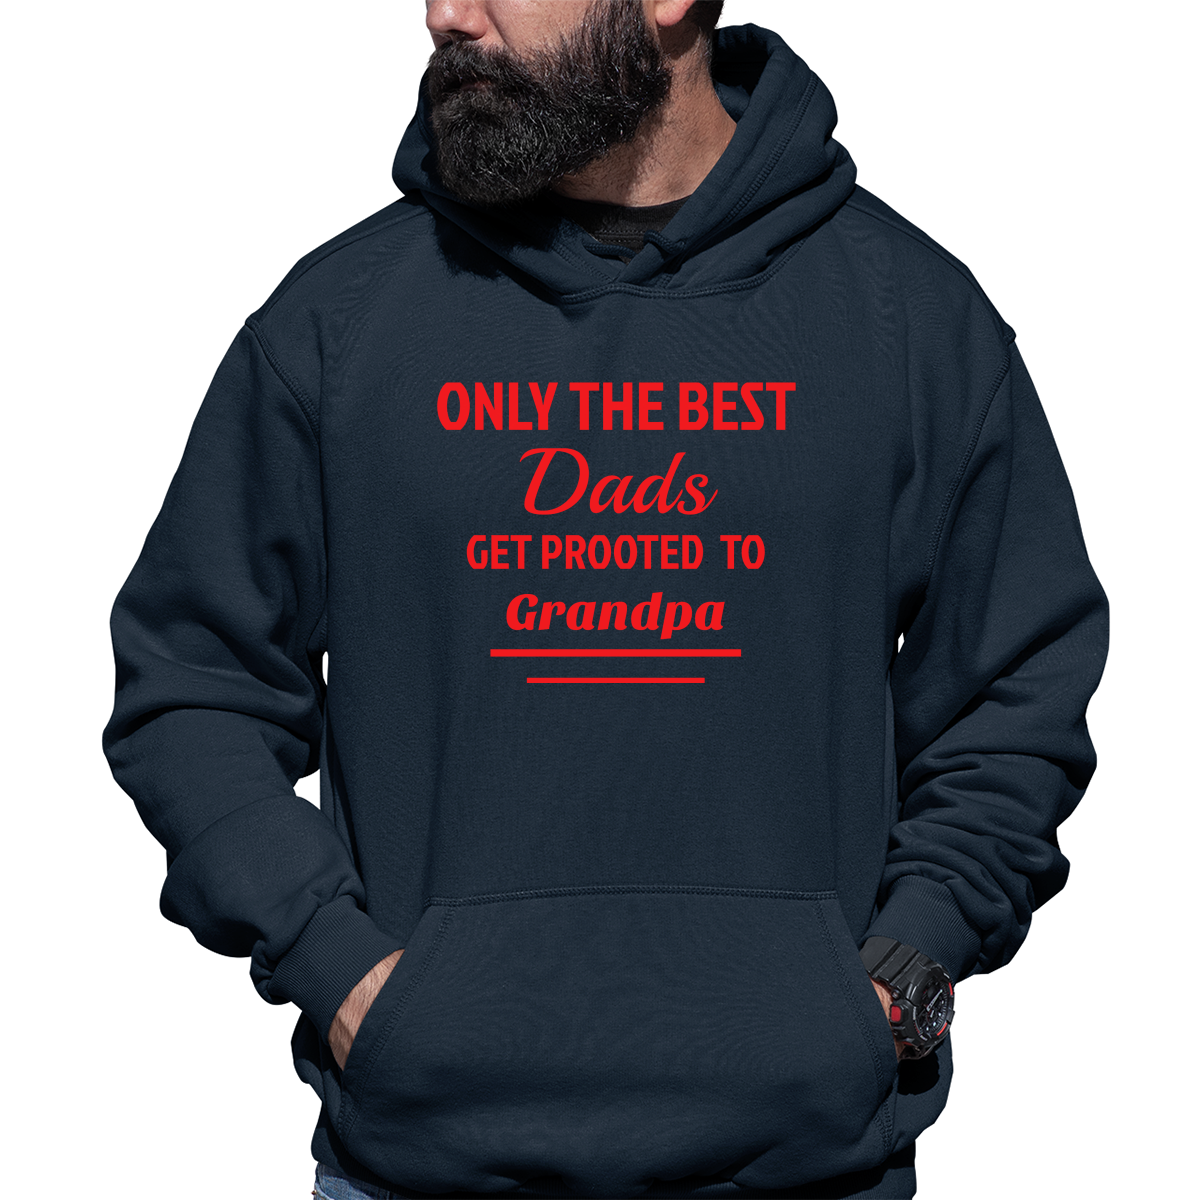 Only The Best Dads Get Promoted To Grandpa Unisex Hoodie | Navy